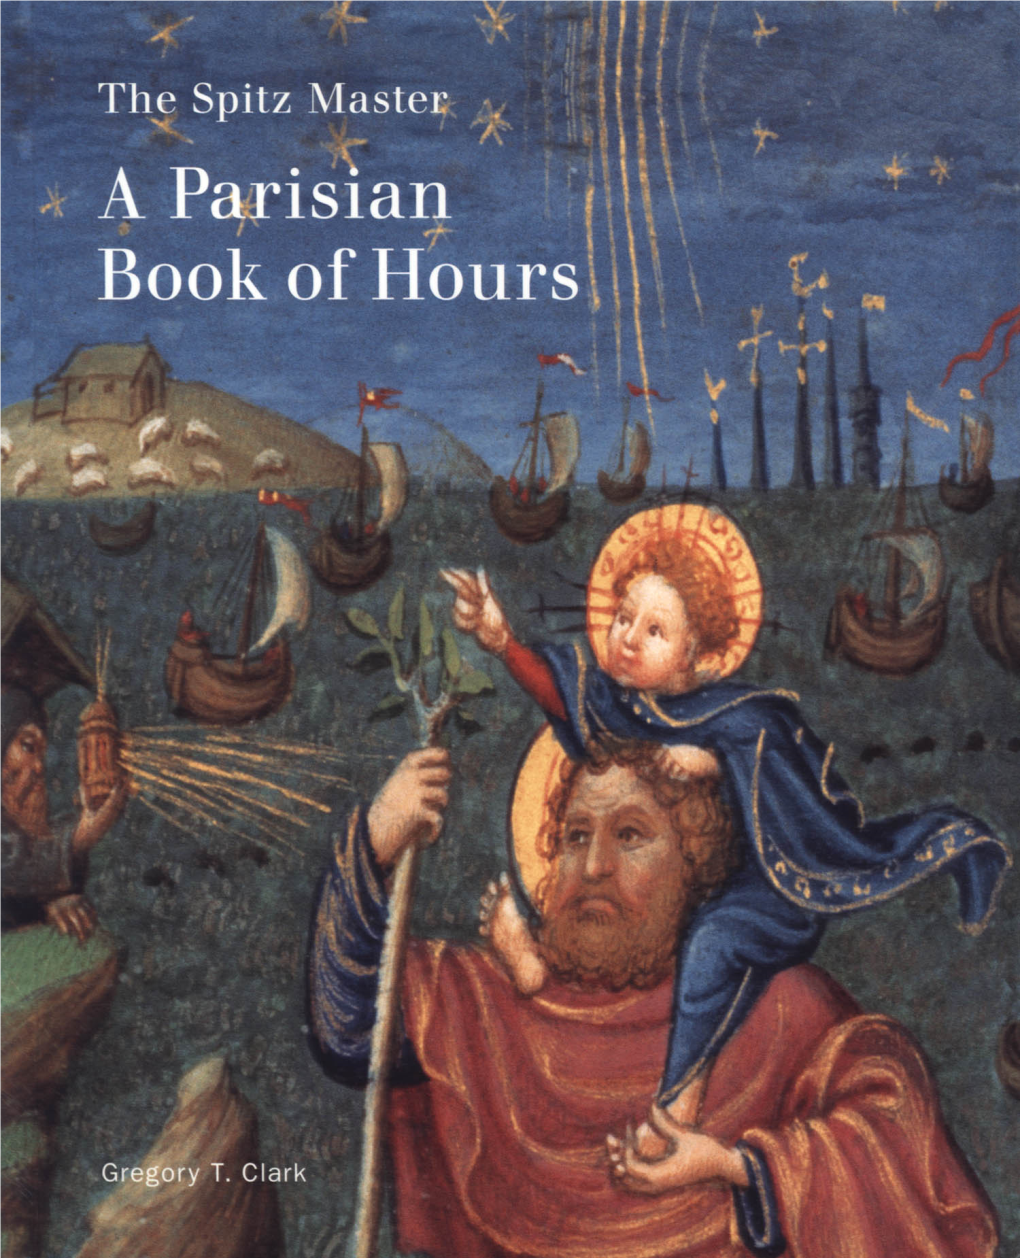 The Spitz Master: a Parisian Book of Hours